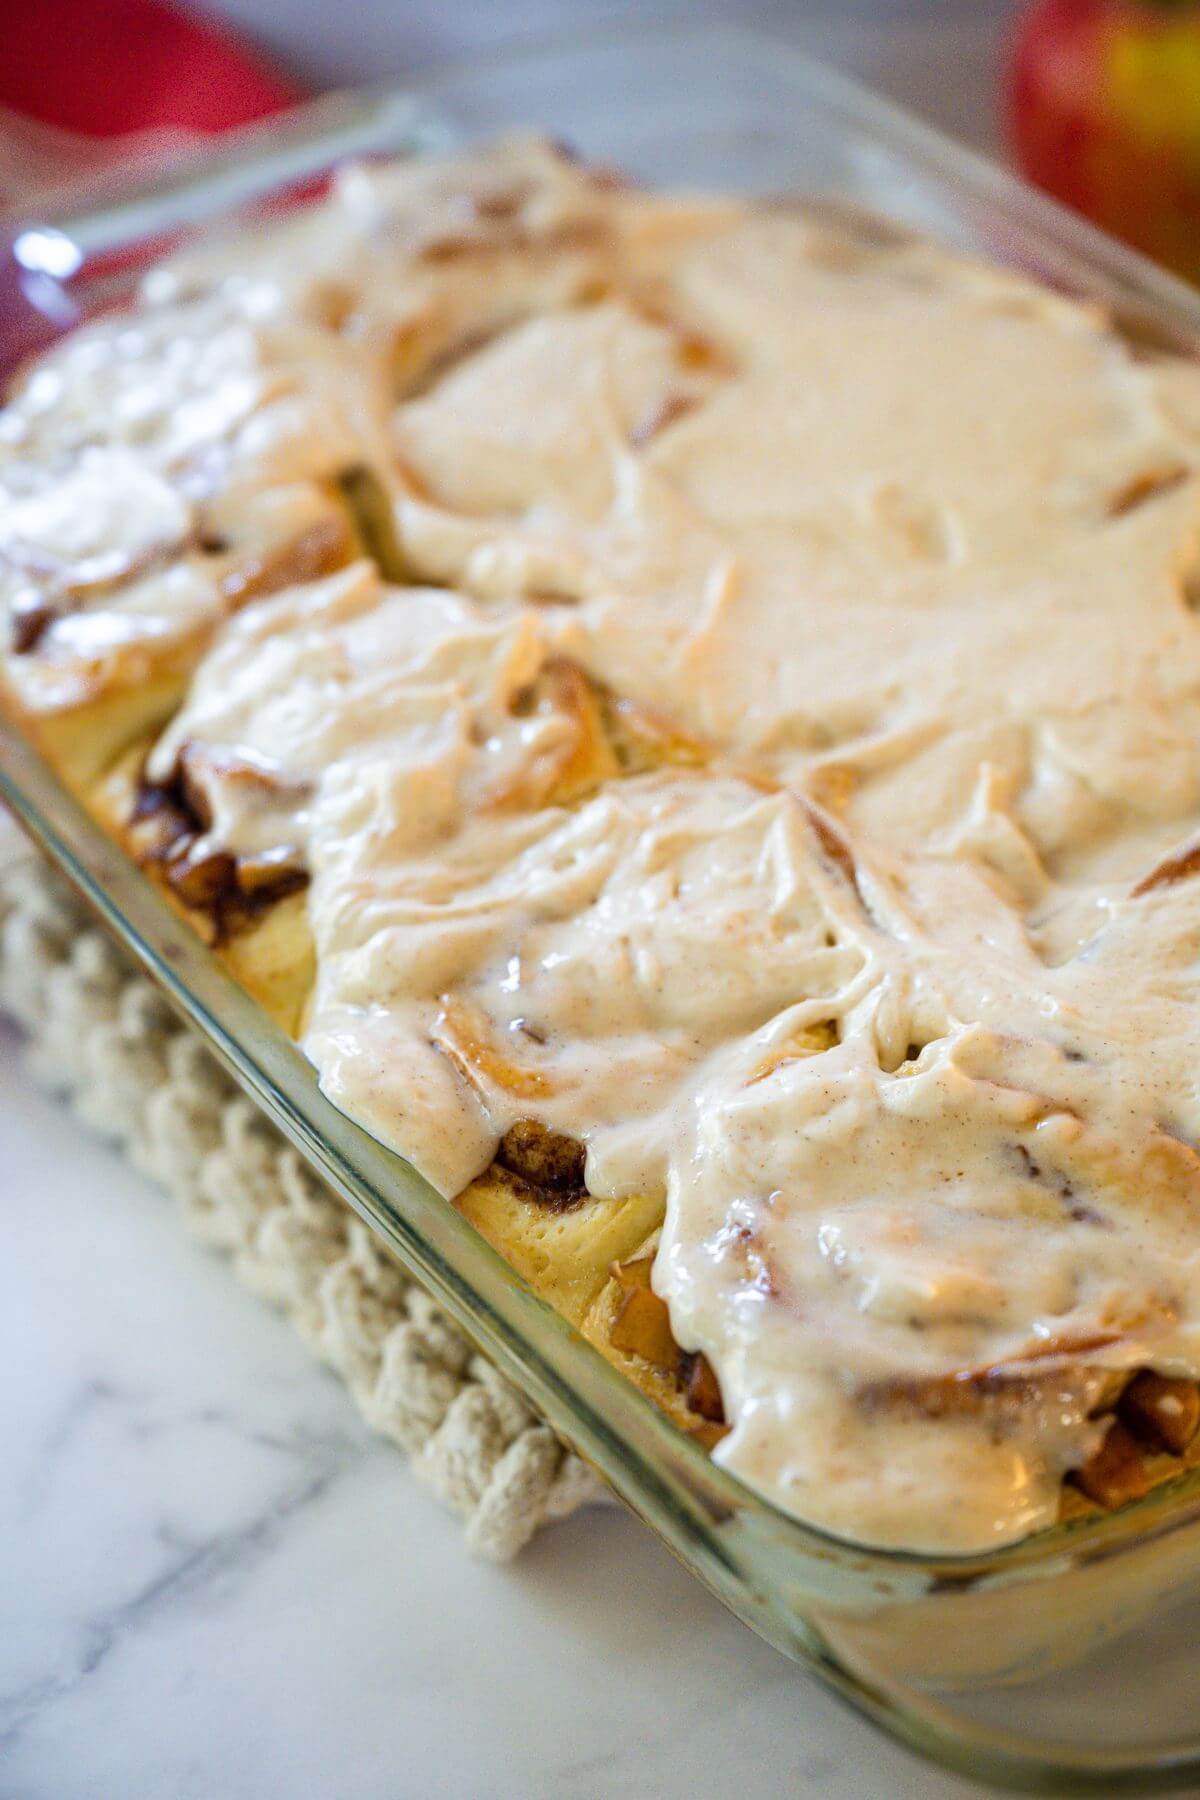 Pan of iced cinnamon rolls with apple pie filling.